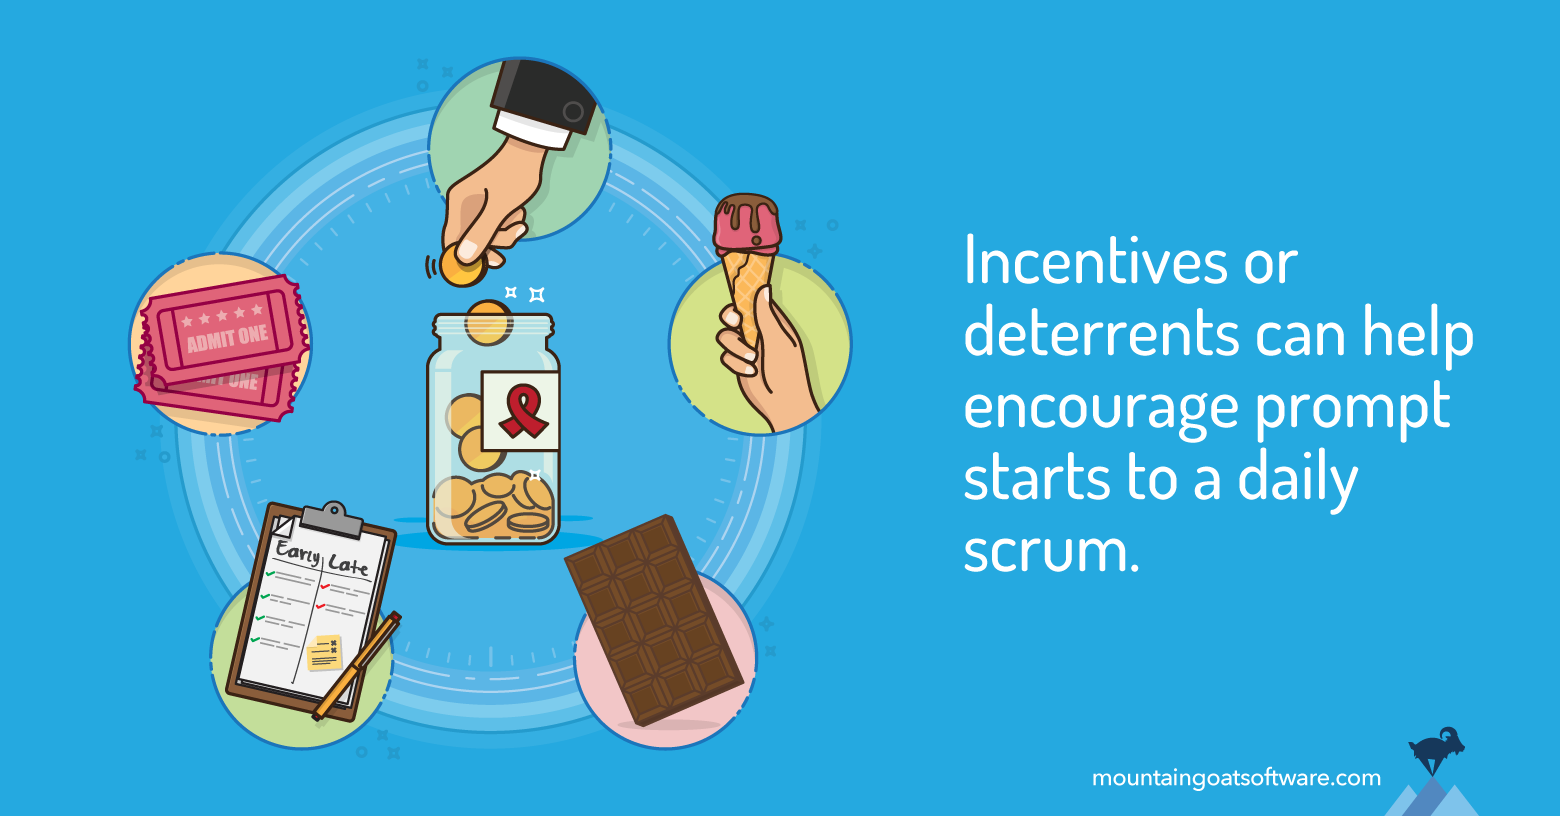 Incentives and Deterrents for Starting Daily Scrums On Time